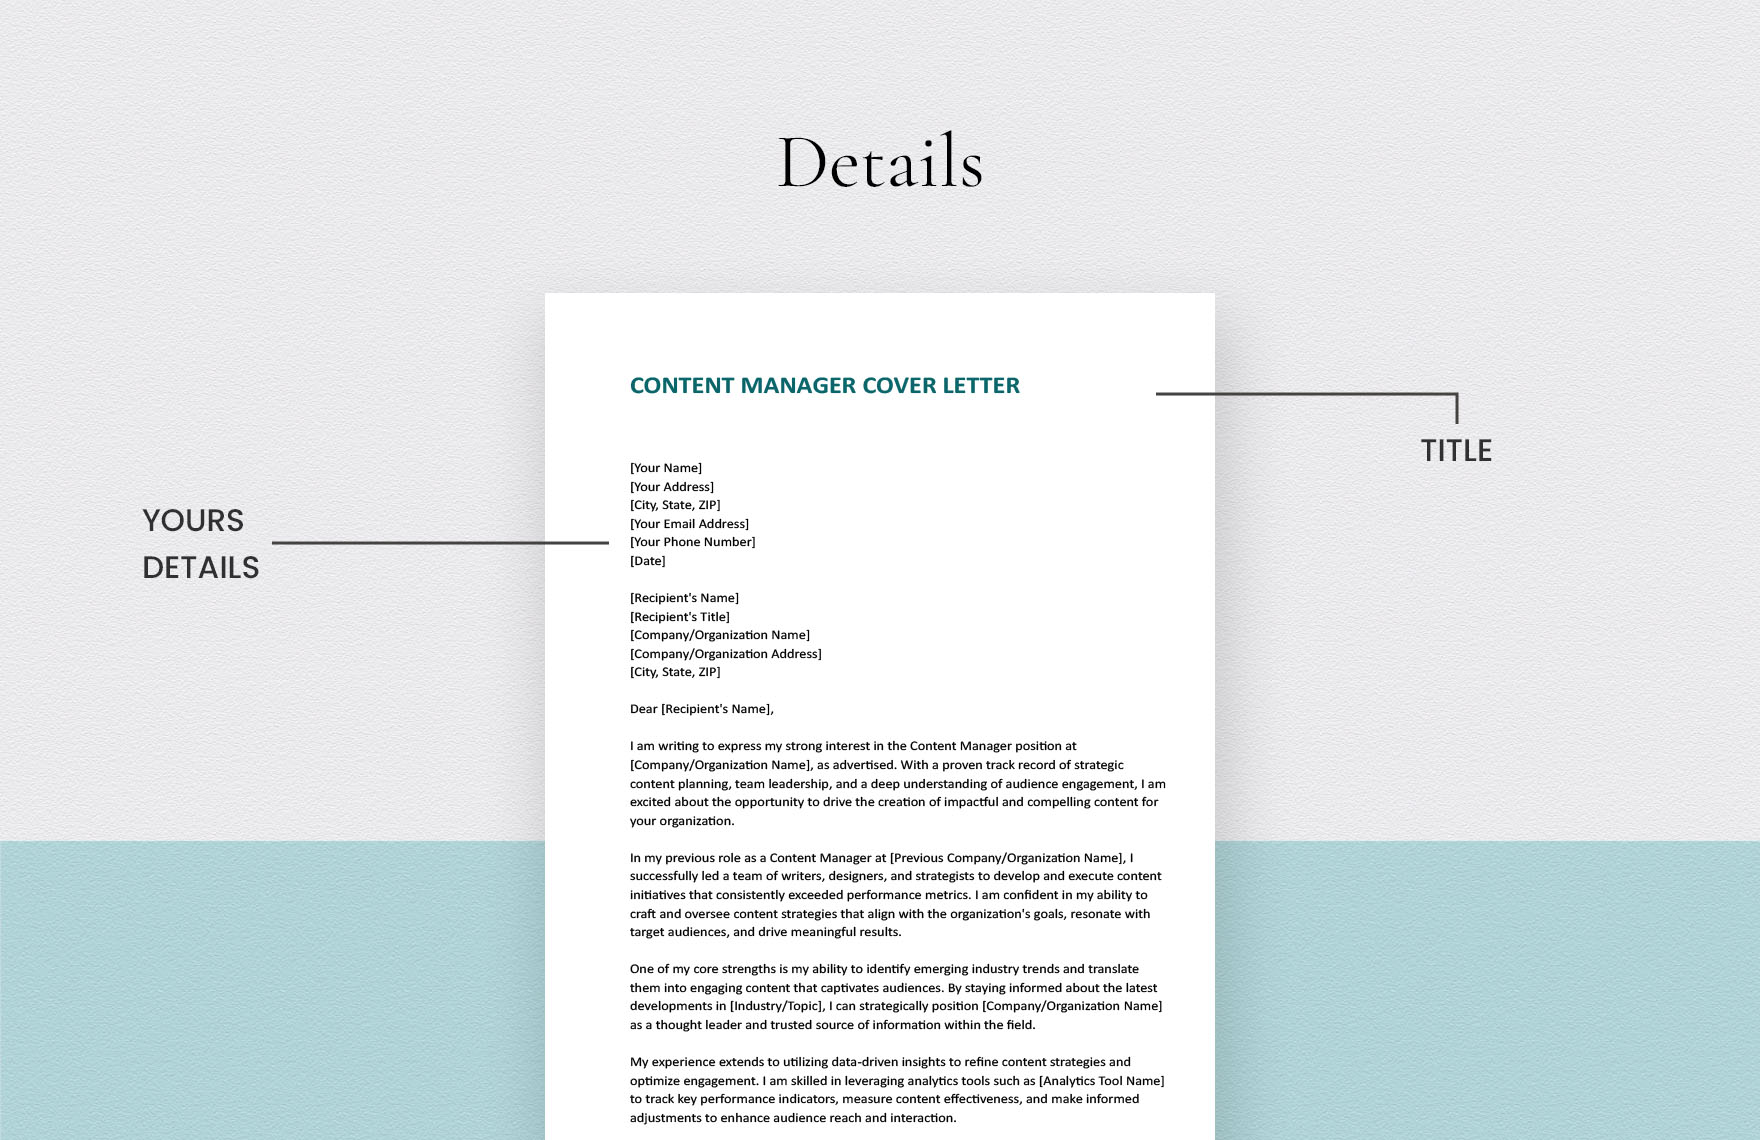 Content Manager Cover Letter